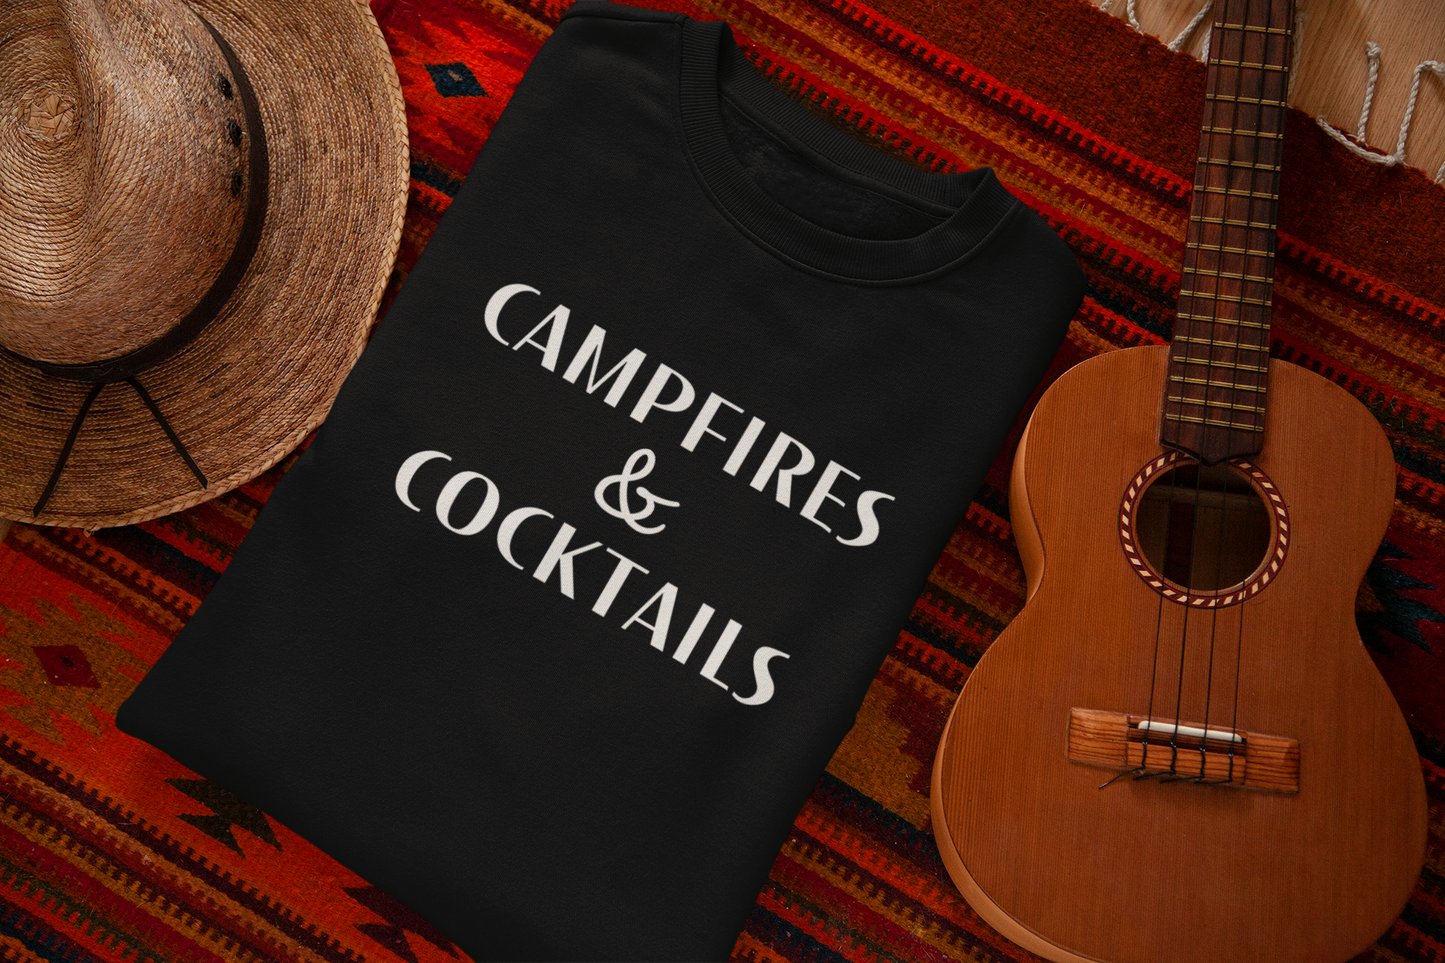 Campfires & Cocktails - Pull Over Sweatshirt. Black unisex crew neck pull over sweatshirt in a lightweight fabric with the saying "campfires & cocktails" in a bold white font. This is the front view of the sweatshirt folded on a orange dark based aztec blanket underneath it, a straw hat to the left of the sweatshirt and a mini ukulele to the right of the sweatshirt.